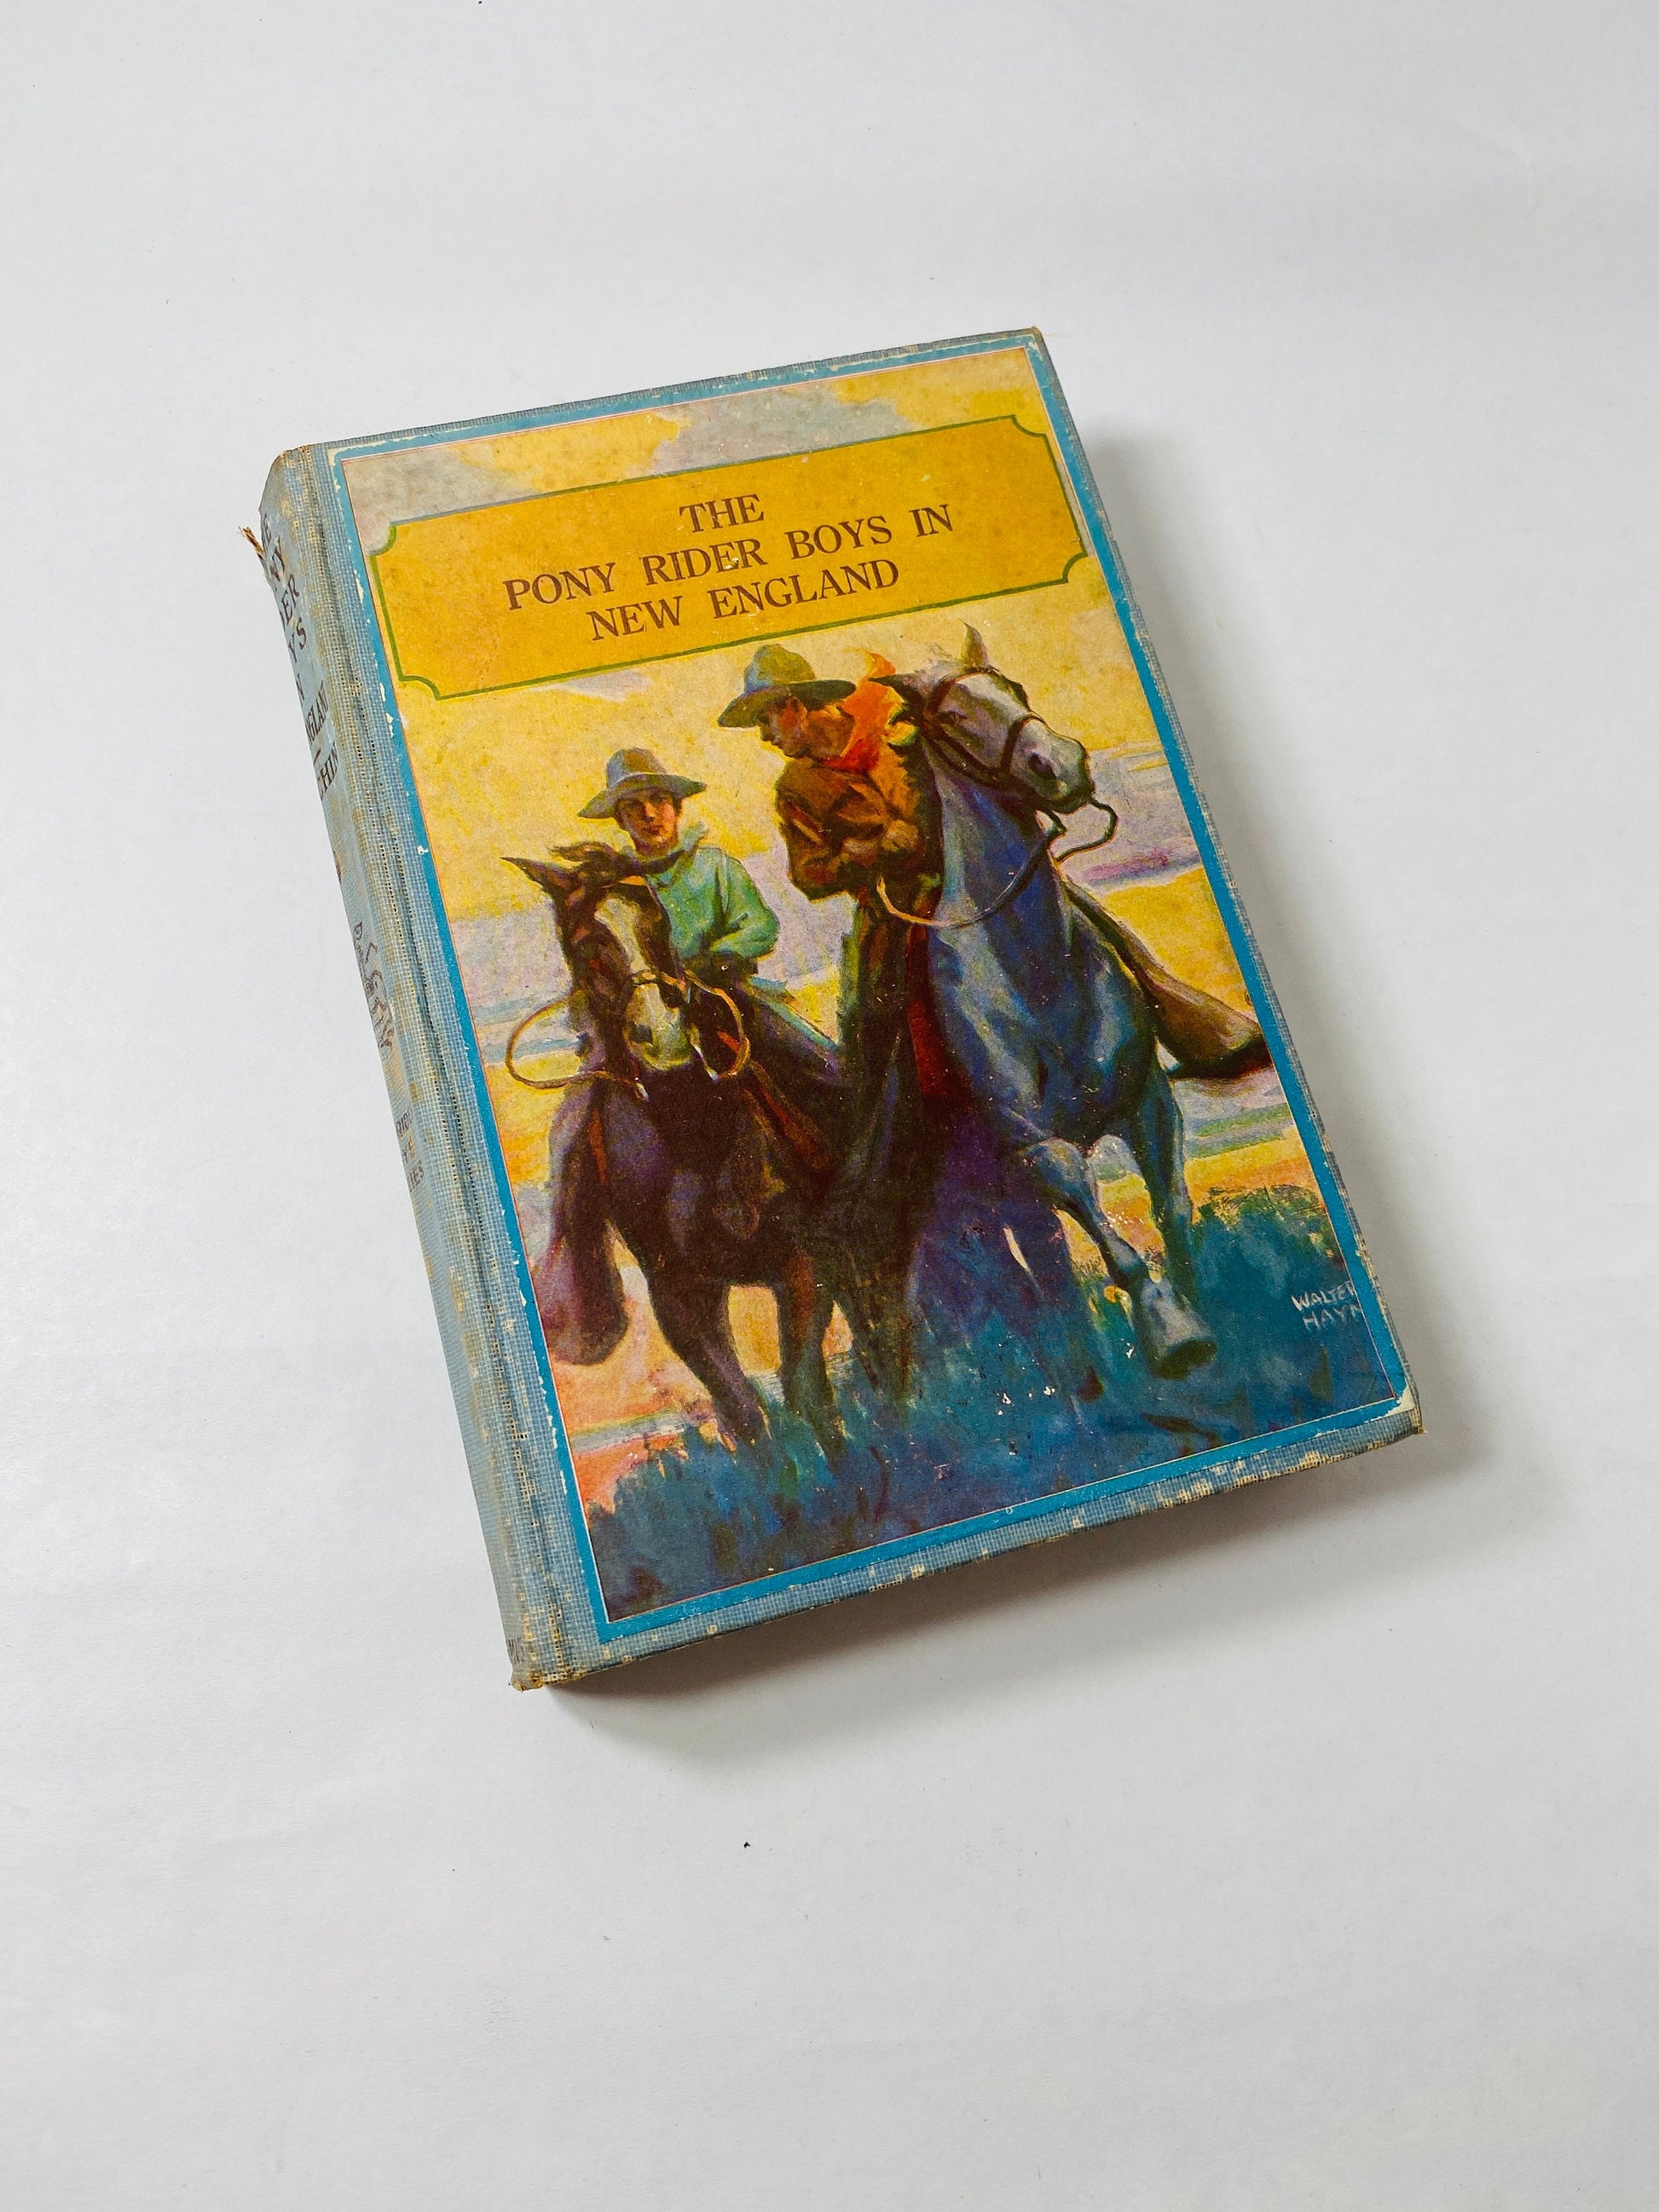 1924 Antique Pony Rider Boys in New England book by Frank Gee Patchin Vintage book Saalfield Publishing Company Cowboy western